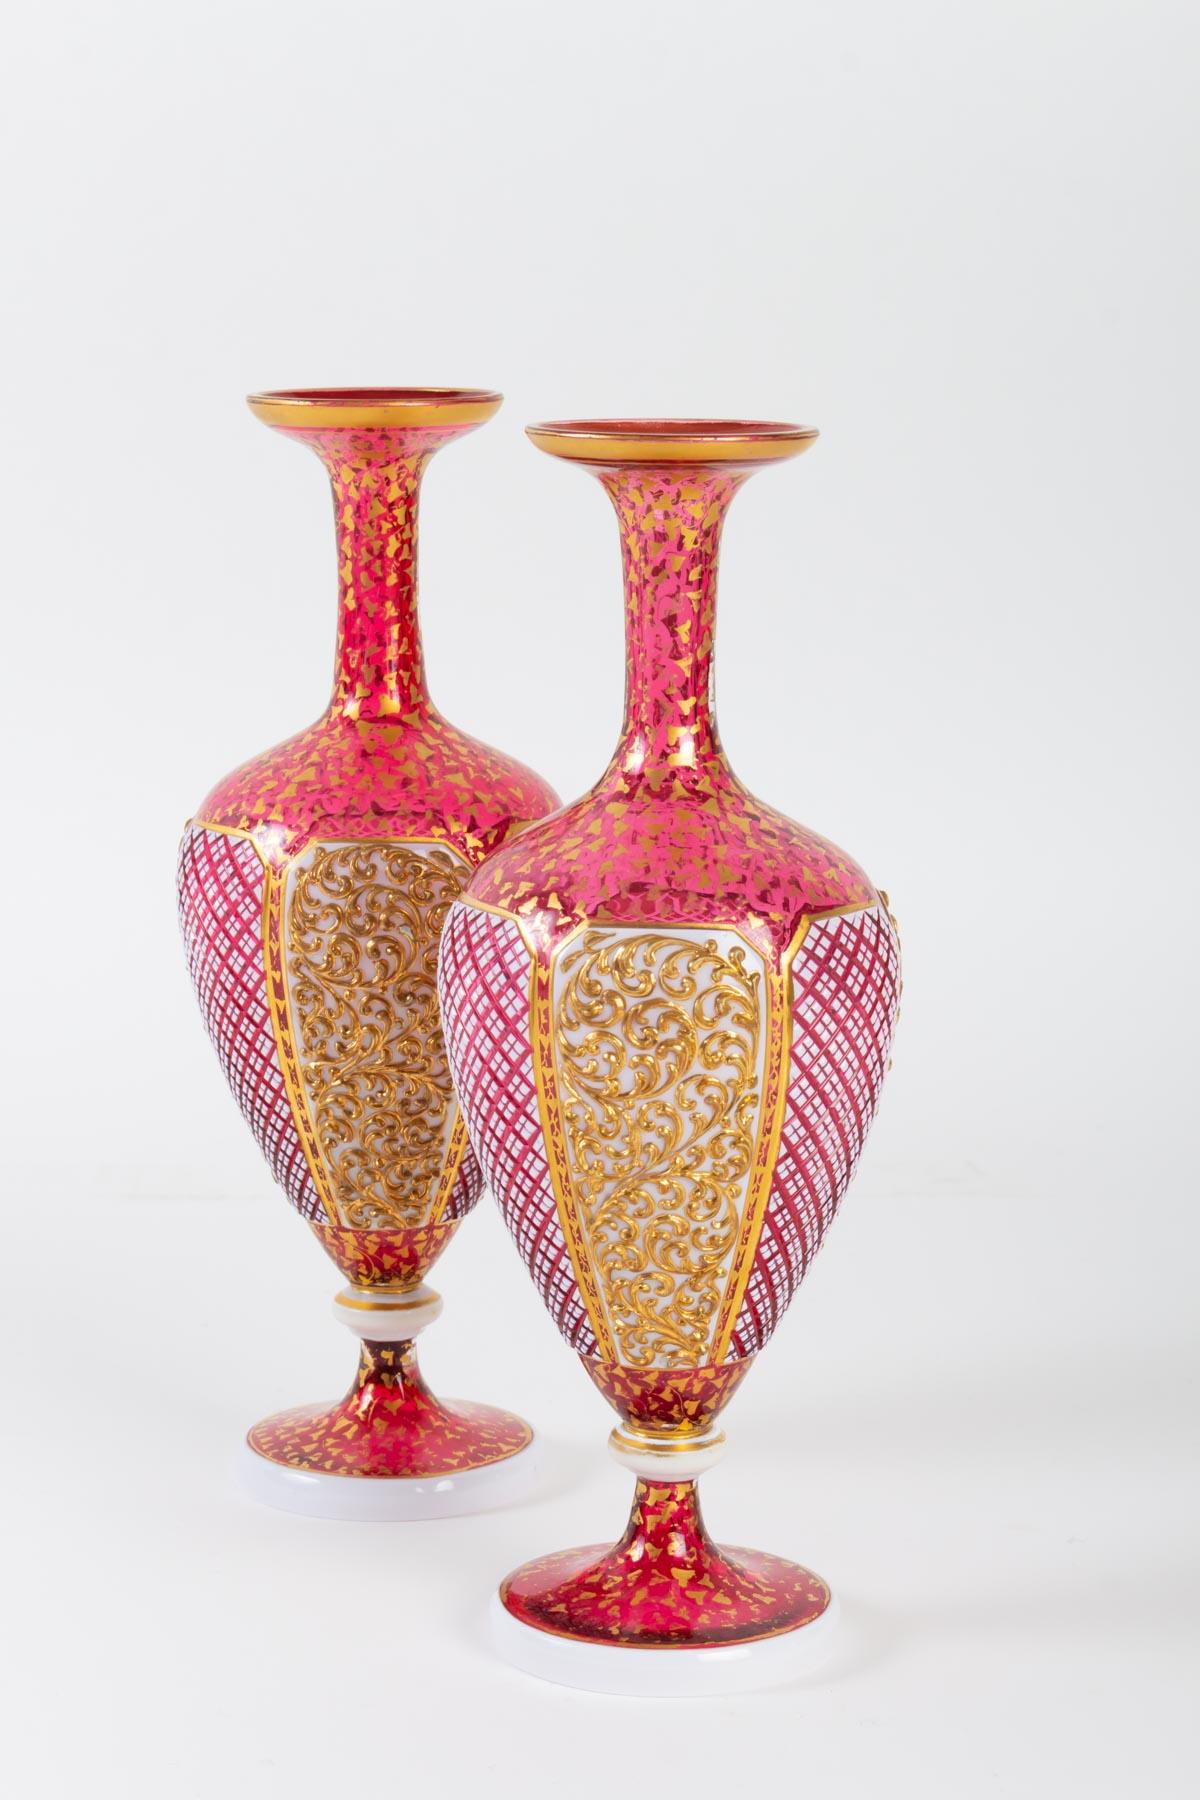 French Pair of Red, Gold and White Bohemian Vases, 19th Century, Napoleon III